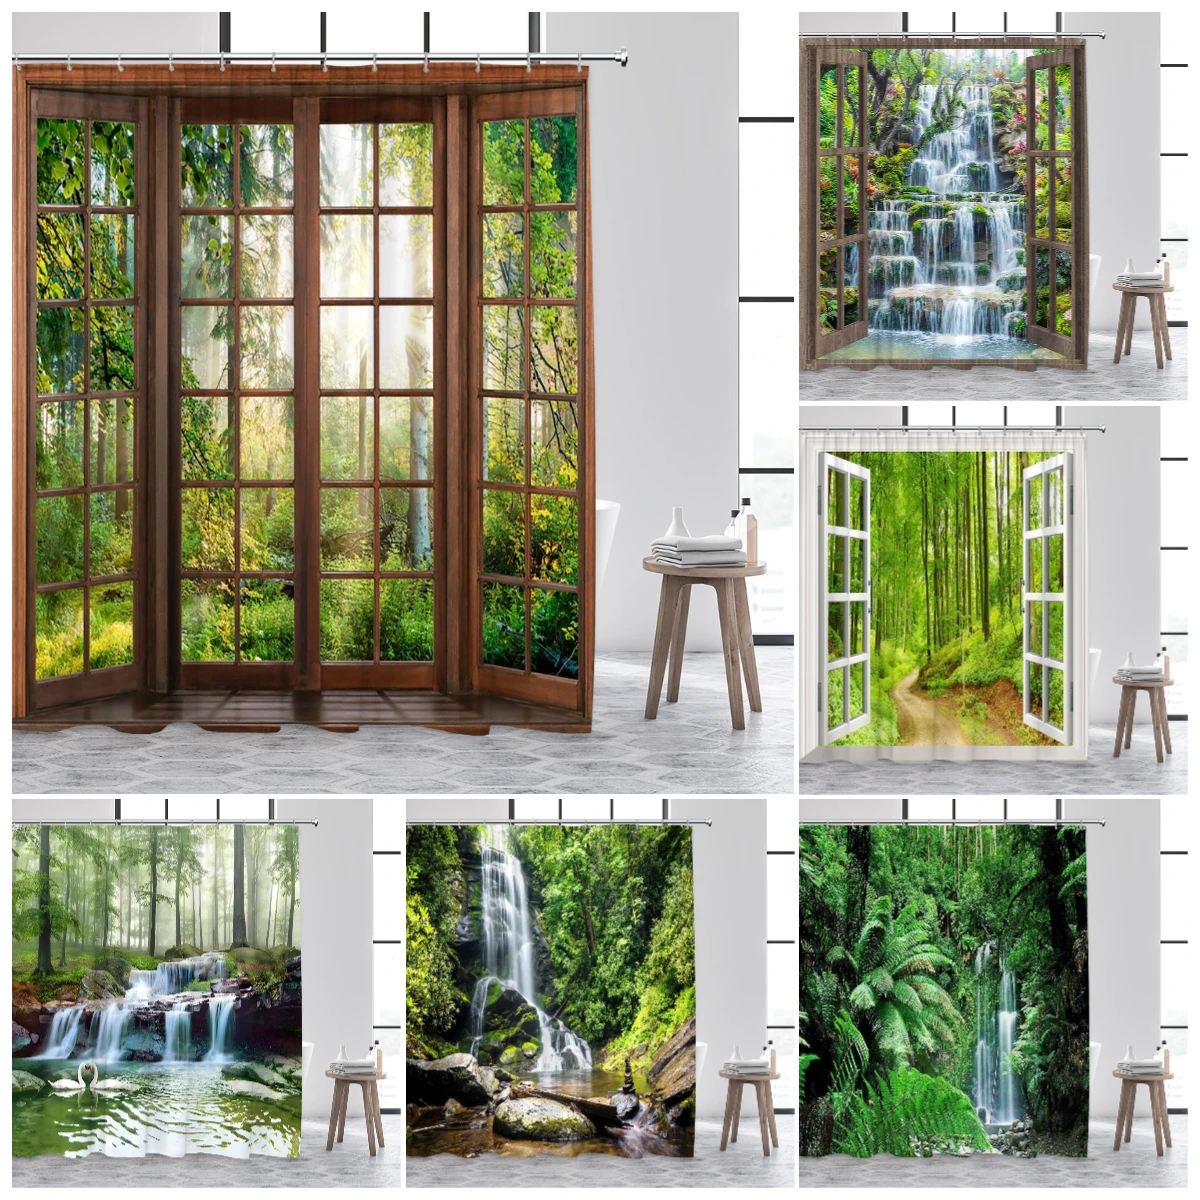 

Forest Landscape Shower Curtains Waterfall Tropical Jungle Plants Rustic Nature Scenery Fabric Bathroom Curtain Decor With Hooks